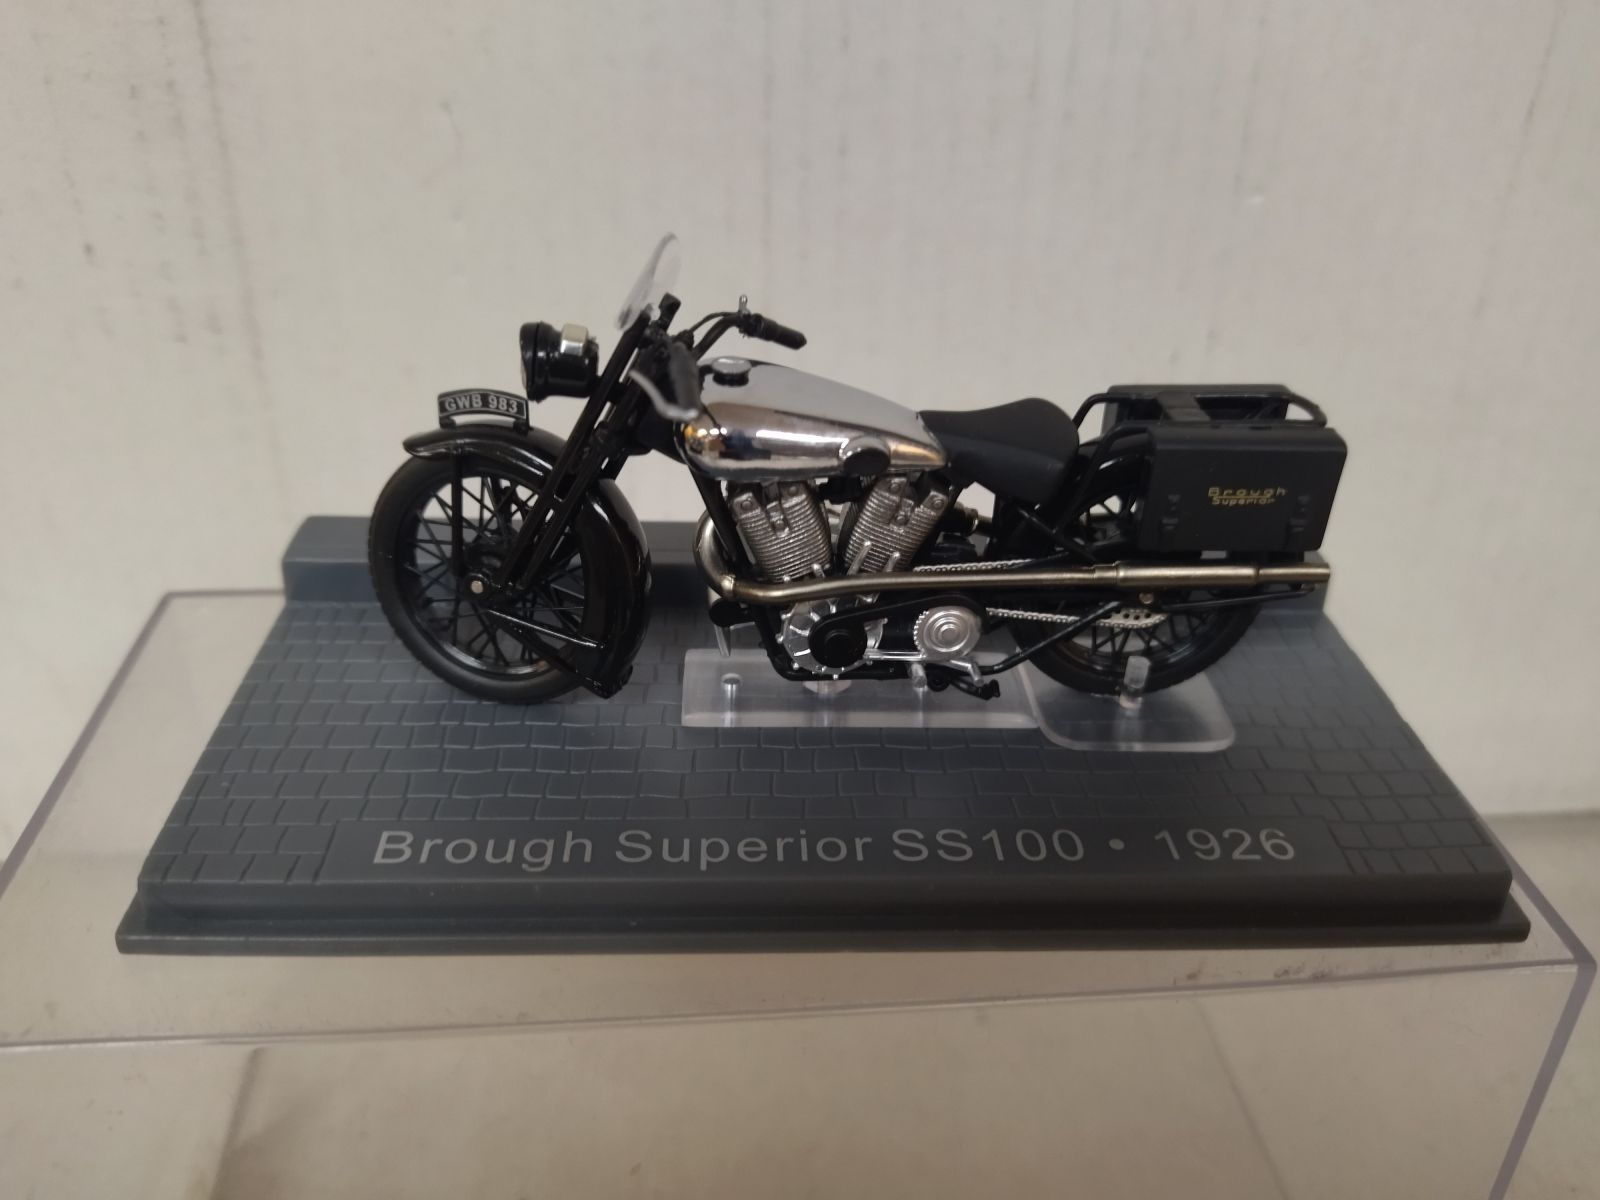 1/24 Brought Superior SS100 1926 - オートバイ